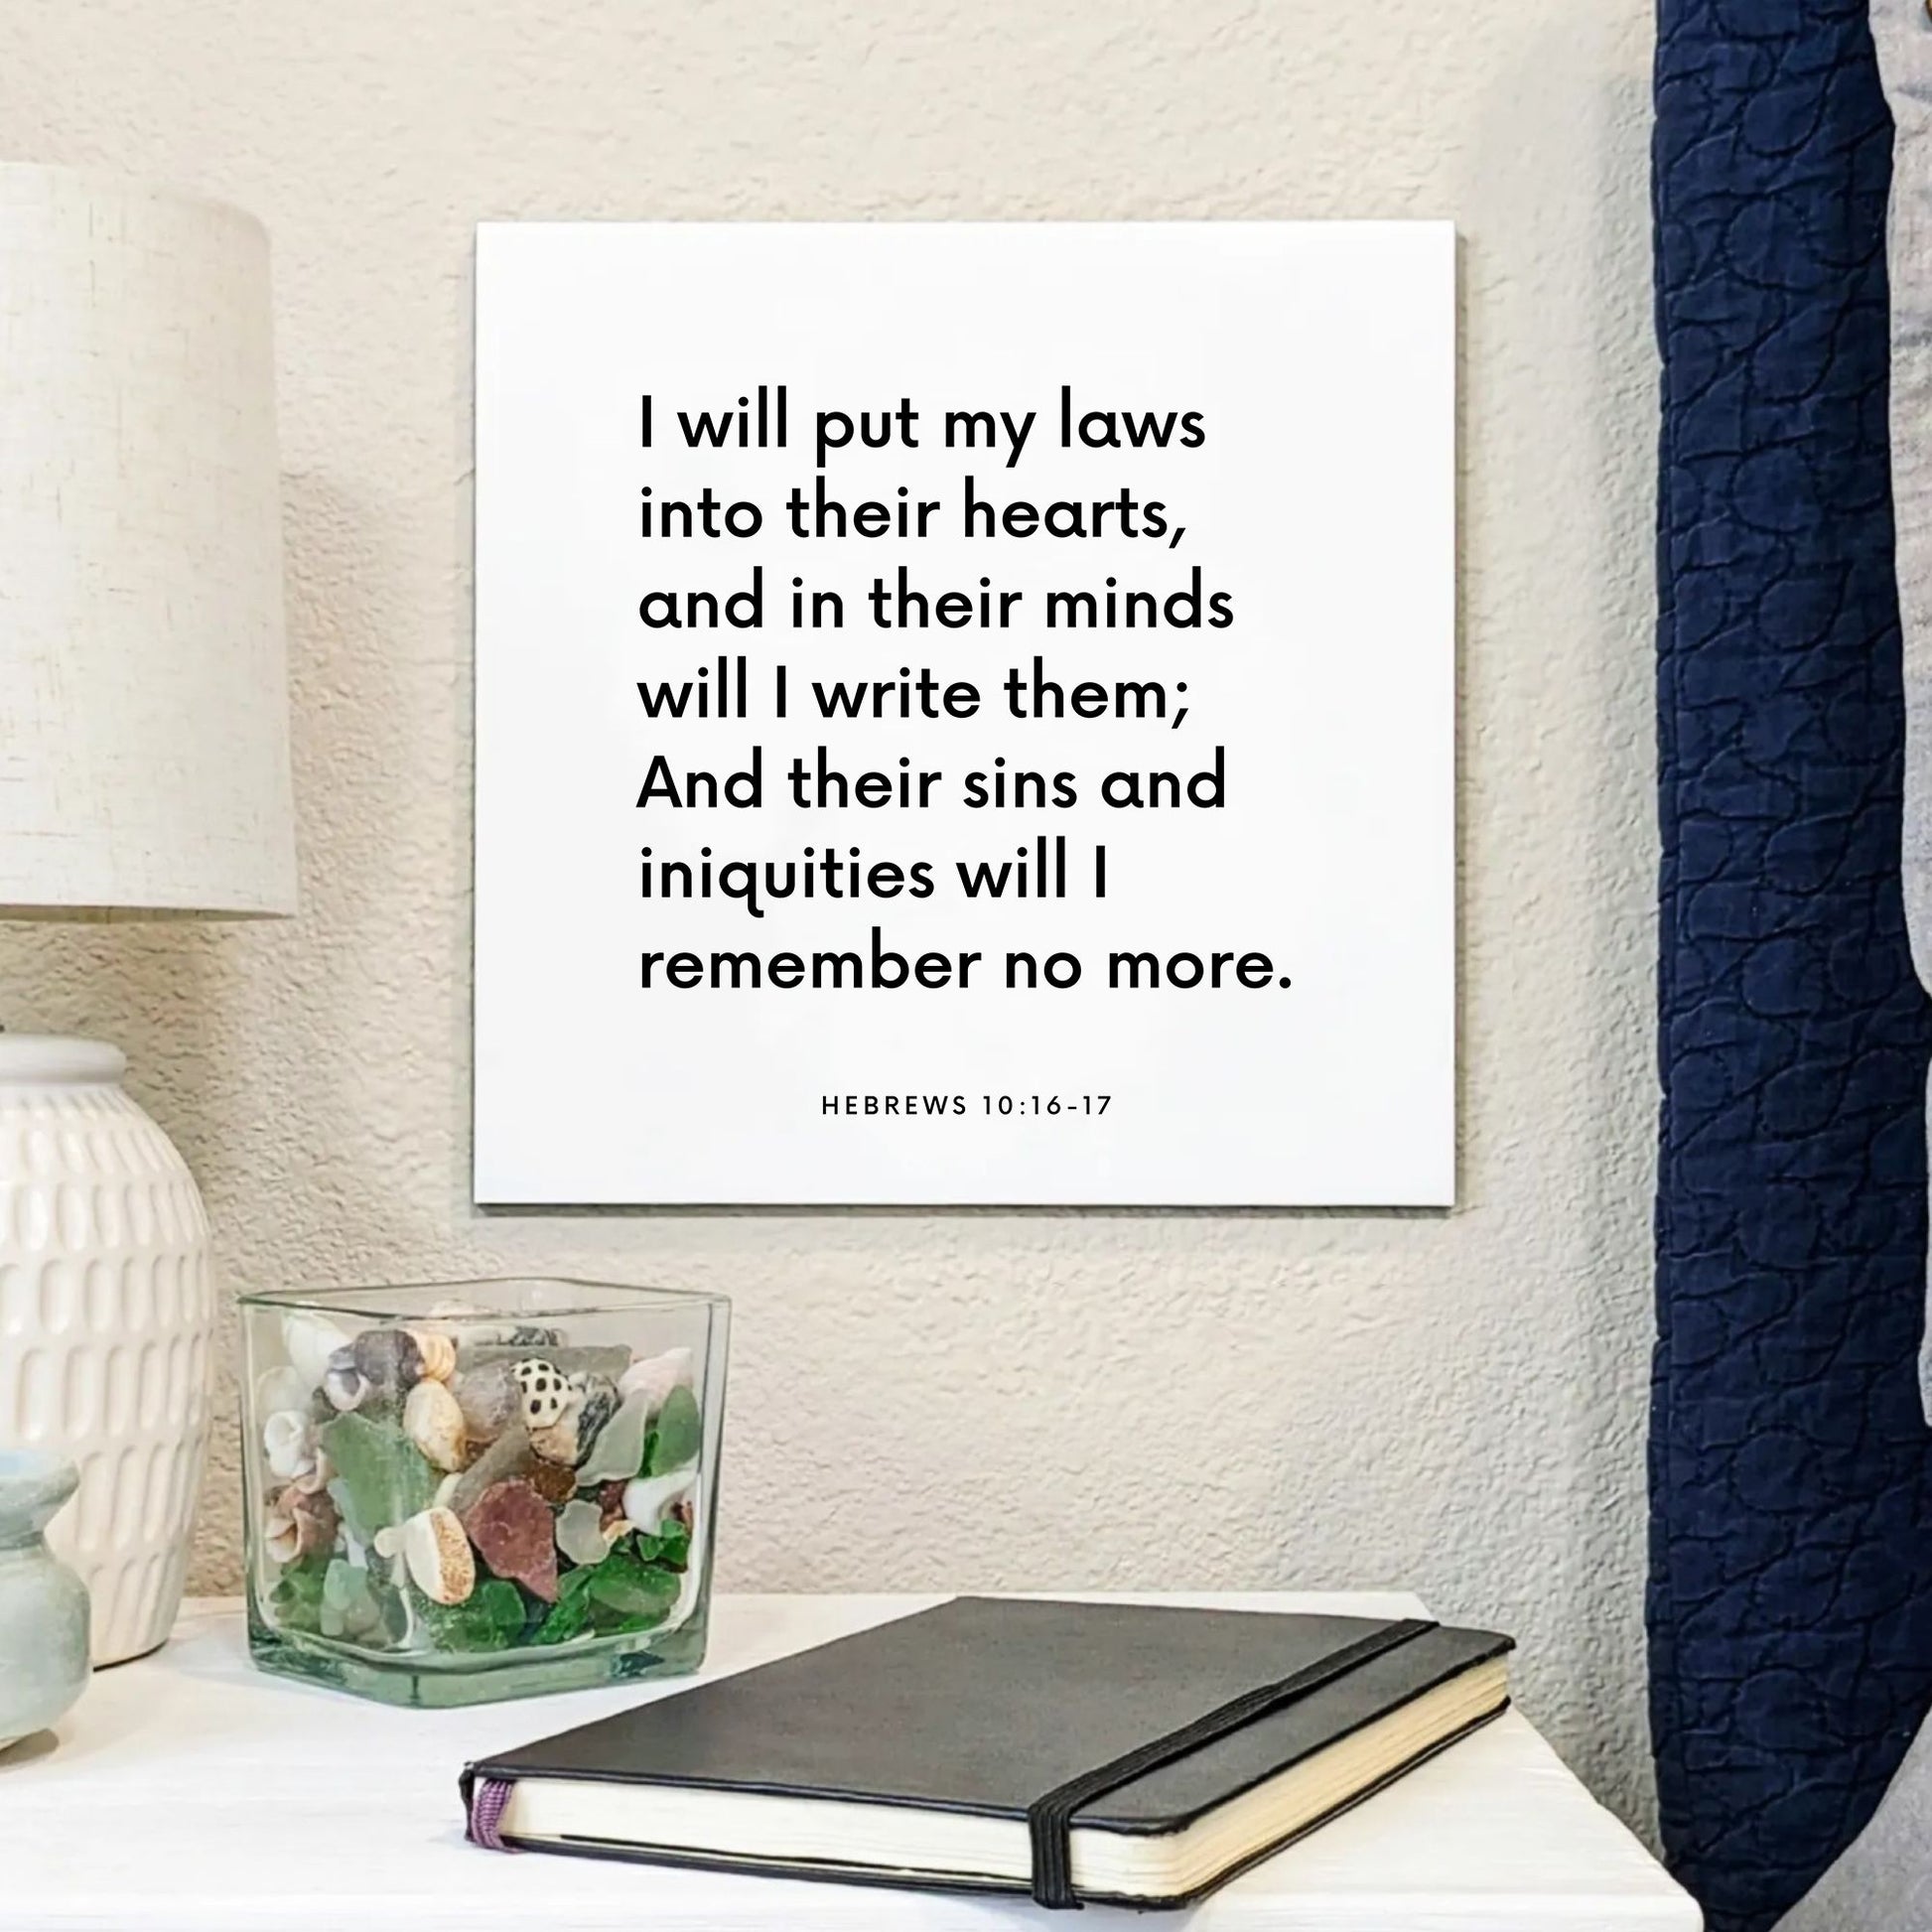 Bedside mouting of the scripture tile for Hebrews 10:16-17 - "I will put my laws into their hearts, and in their minds"